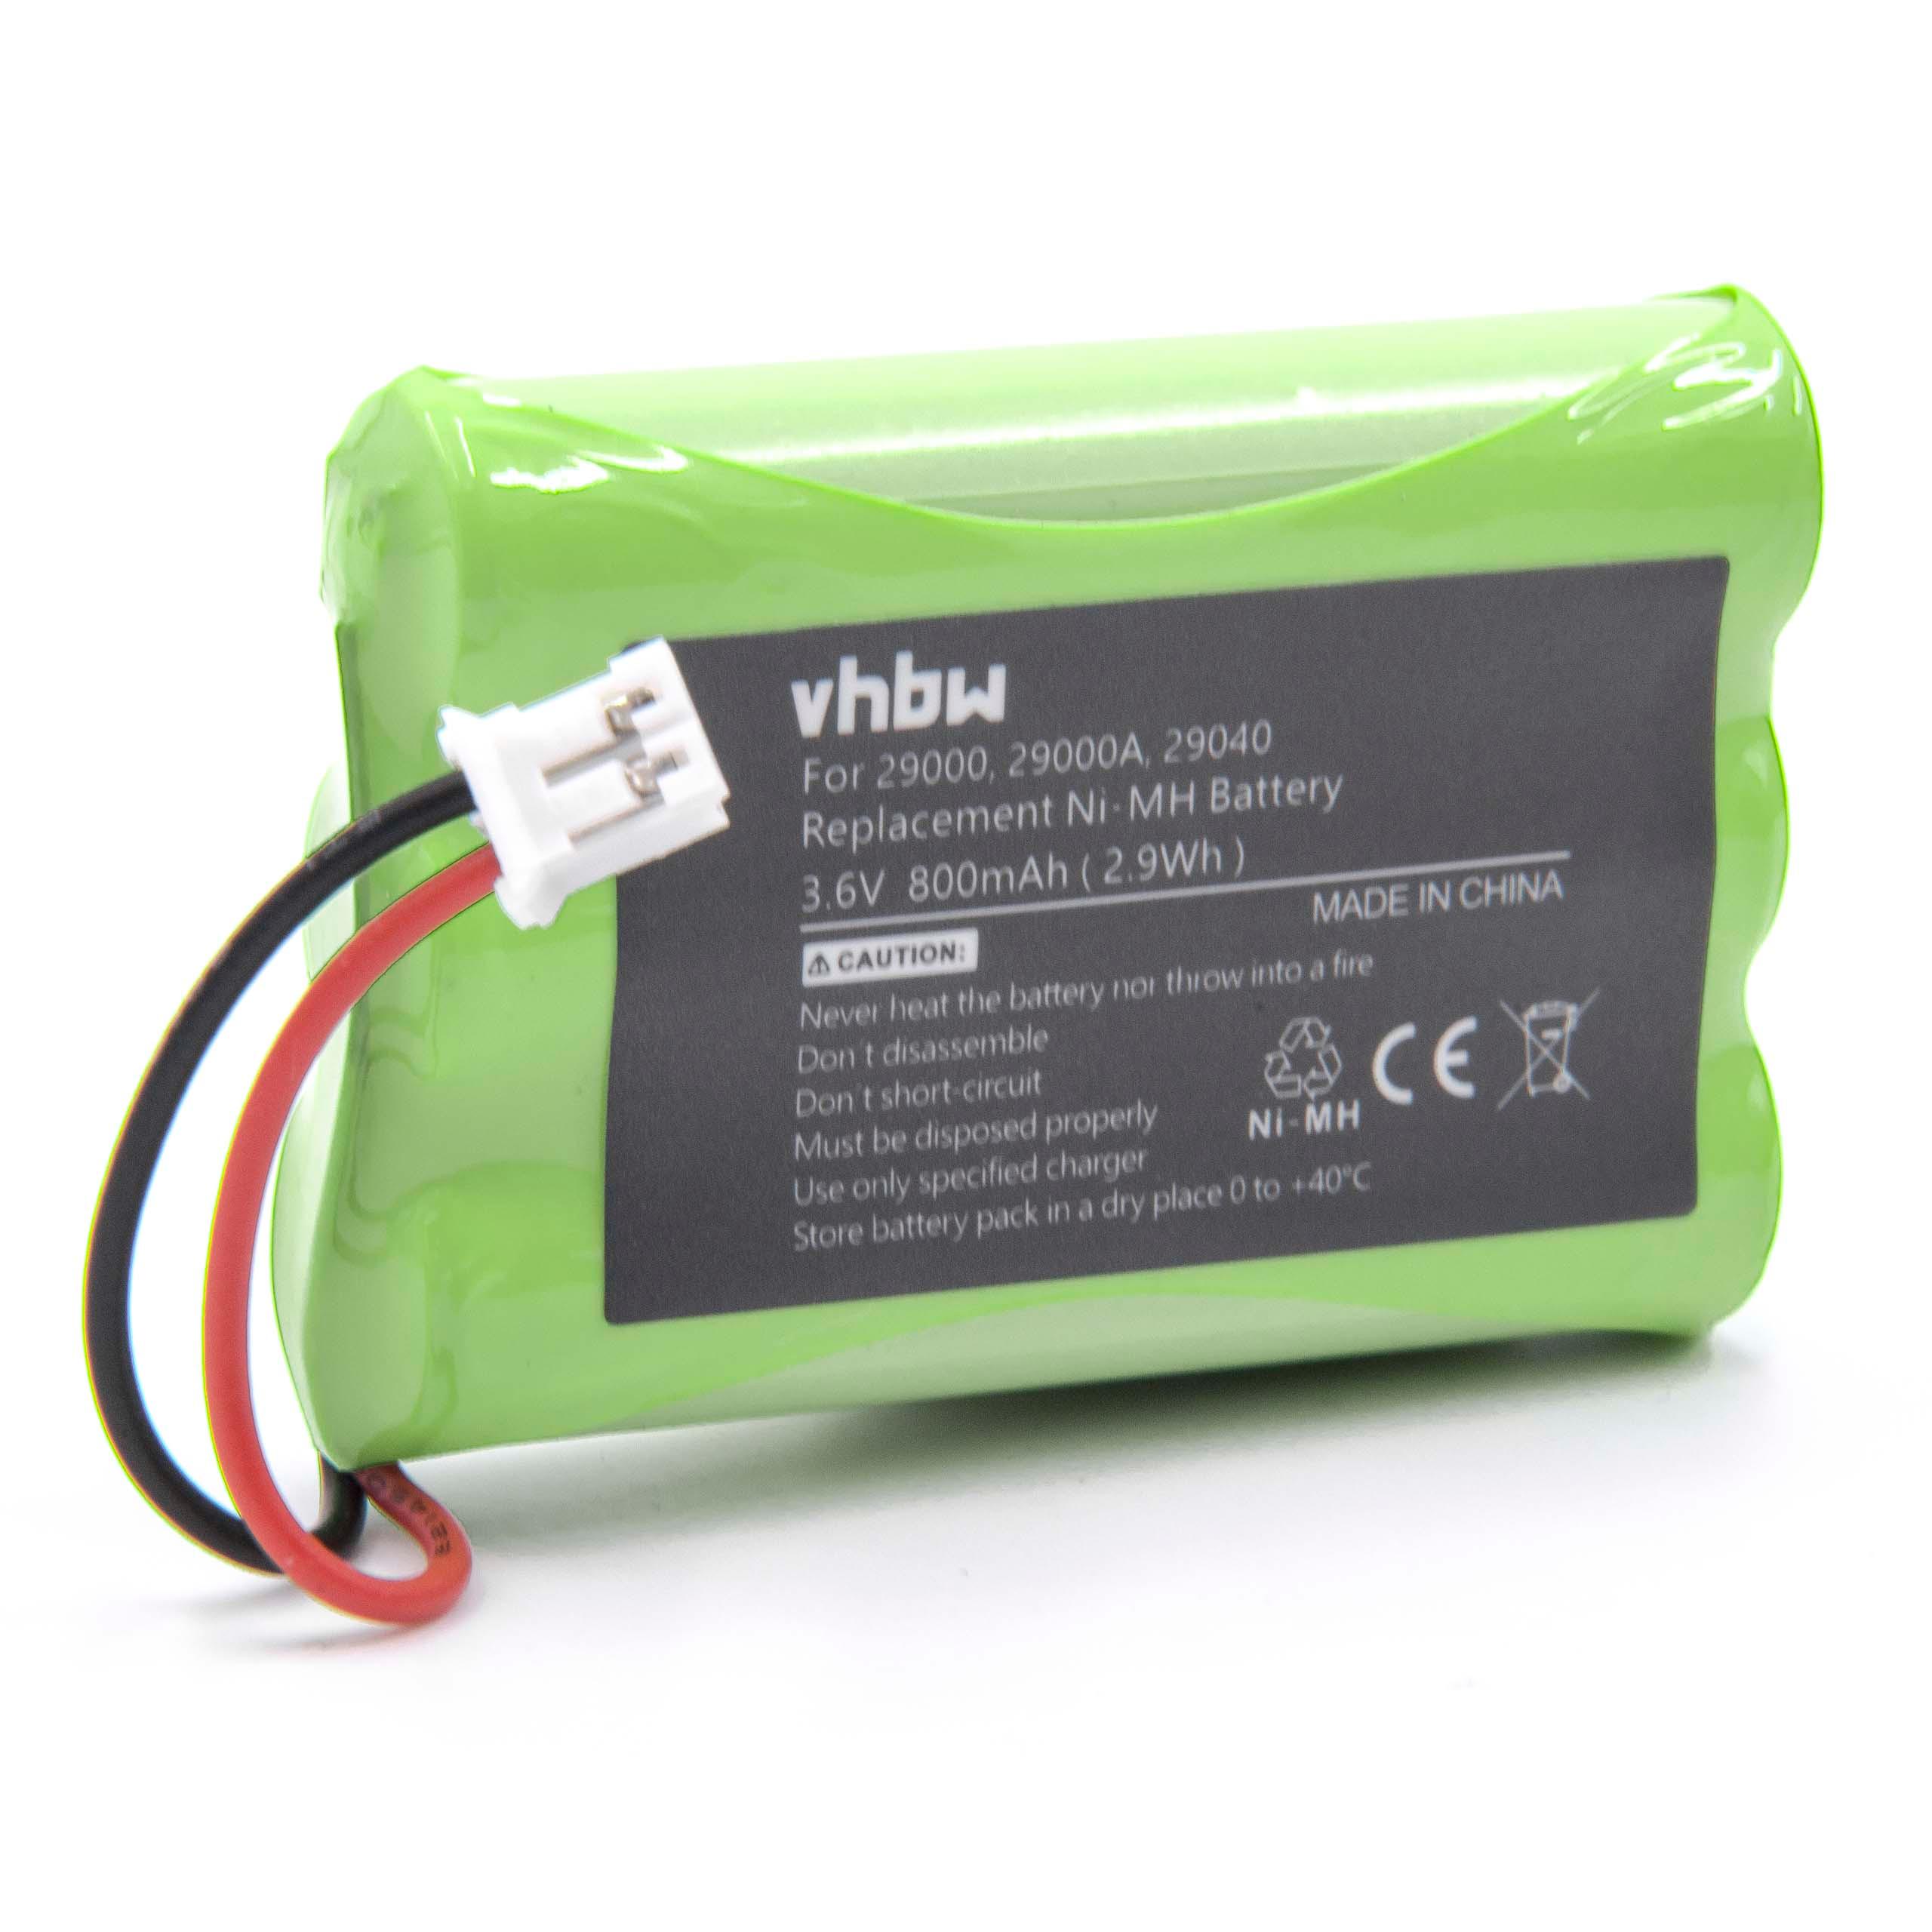 Baby Monitor Battery Replacement for Summer Infant 29030-10, 29030 - 800mAh 3.6V NiMH